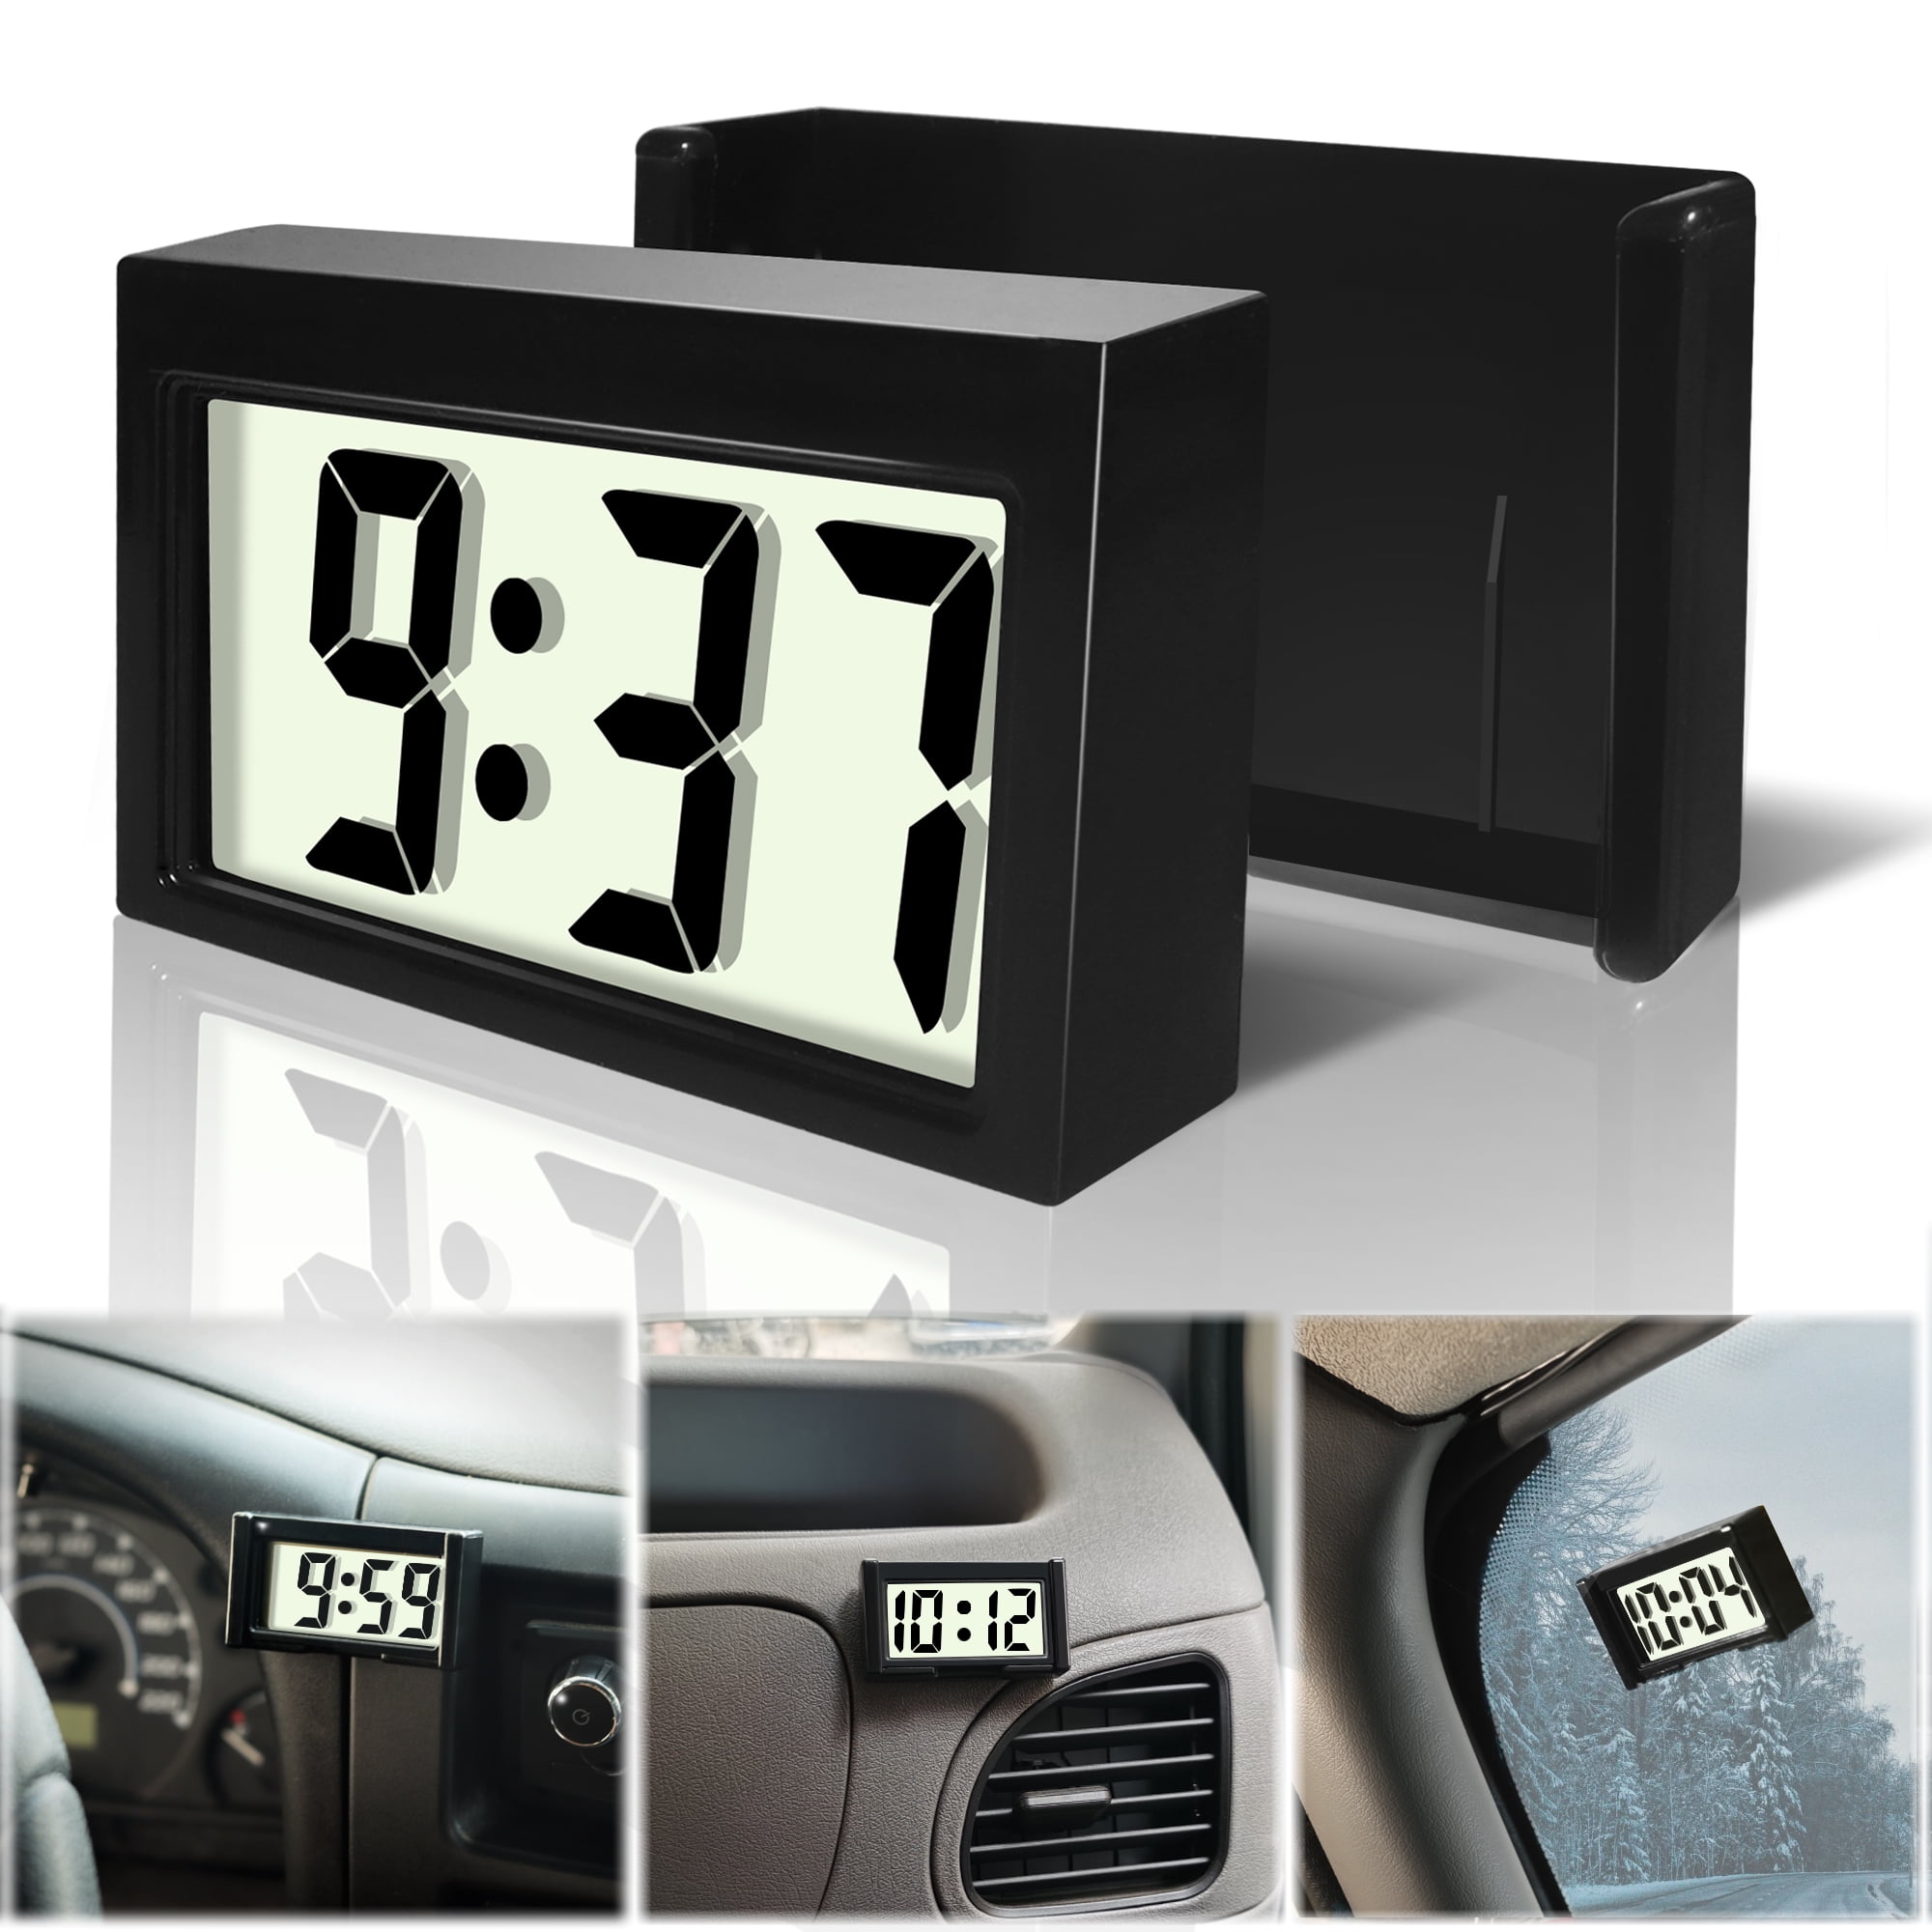 Black Car Dashboard Digital LCD Blue Backlight Thermometer Time Clock MO 